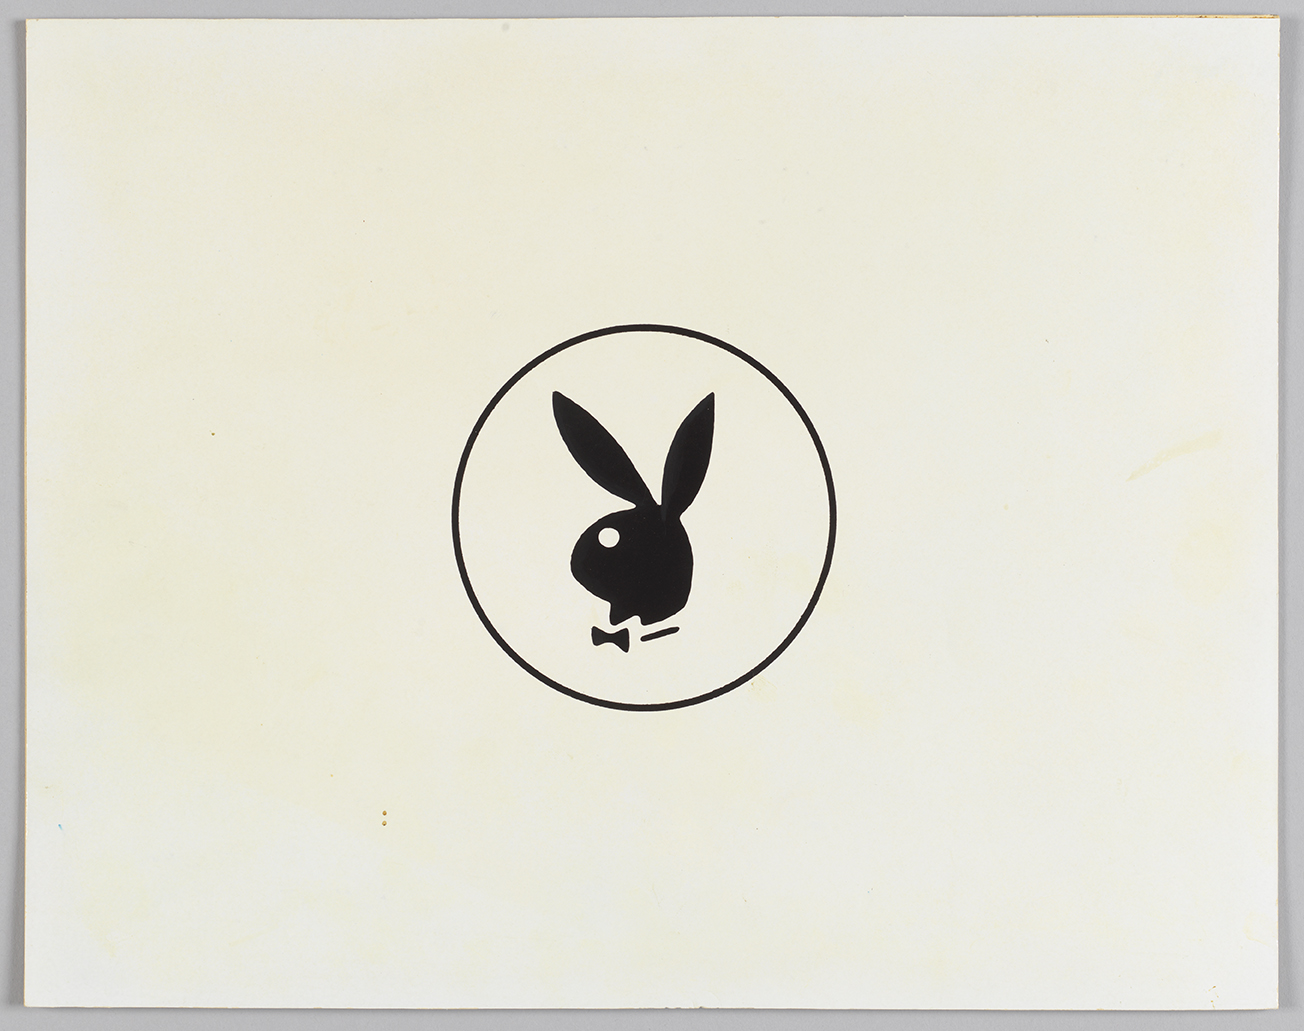 A landscape sheet of paper with the bow-tied Playboy bunny circled and in black at the center.